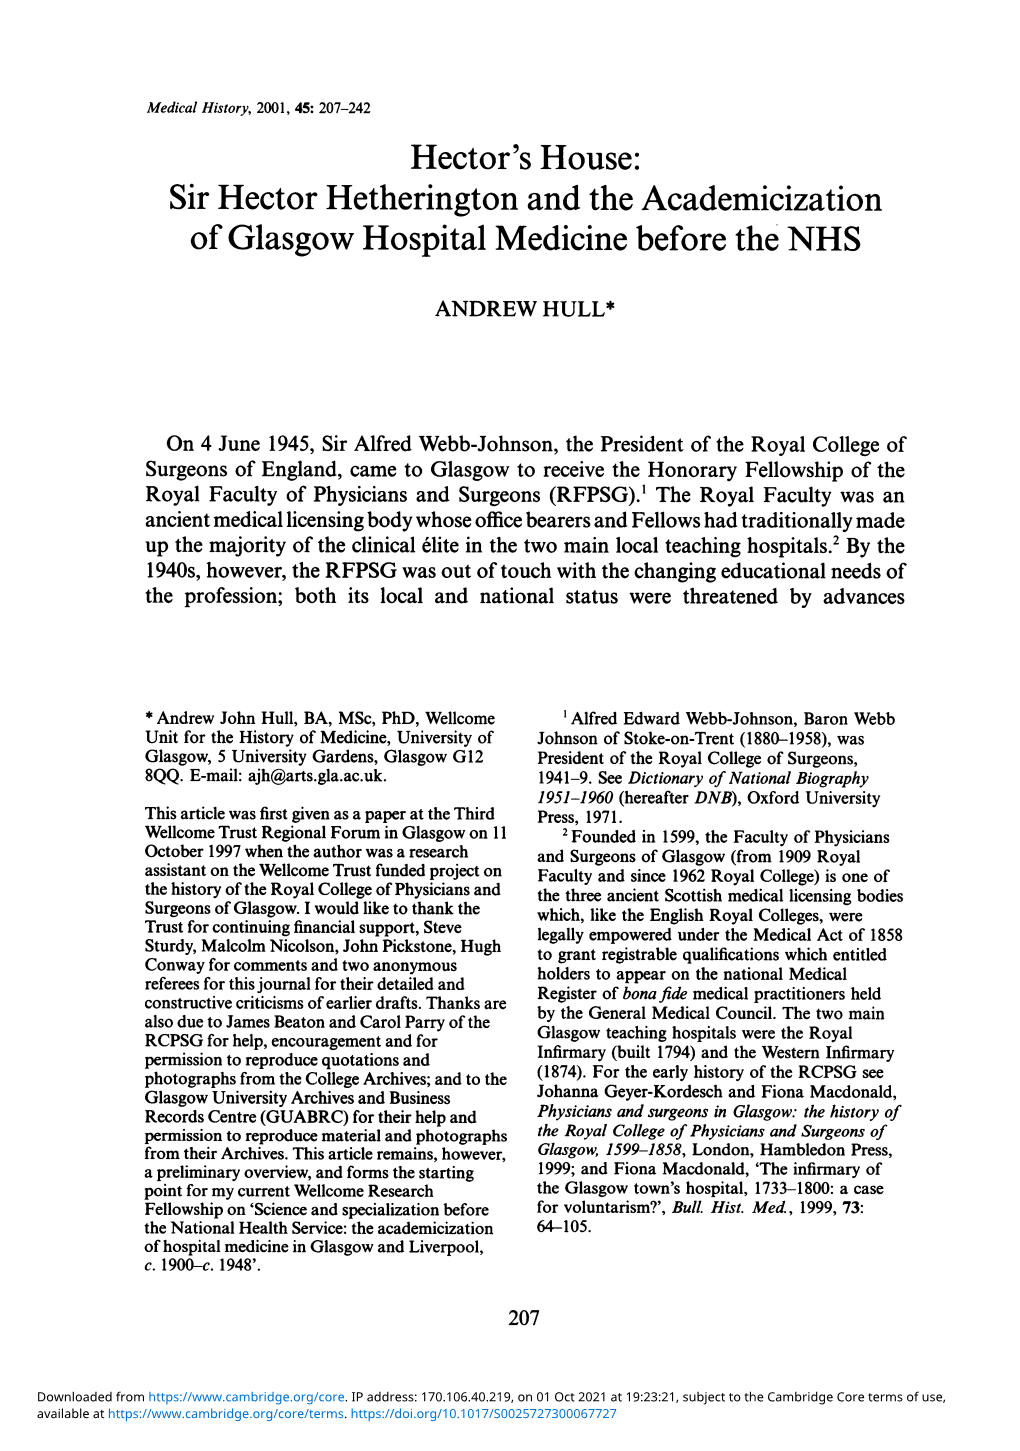 Hector's House: Sir Hector Hetherington and the Academicization of Glasgow Hospital Medicine Before the NHS